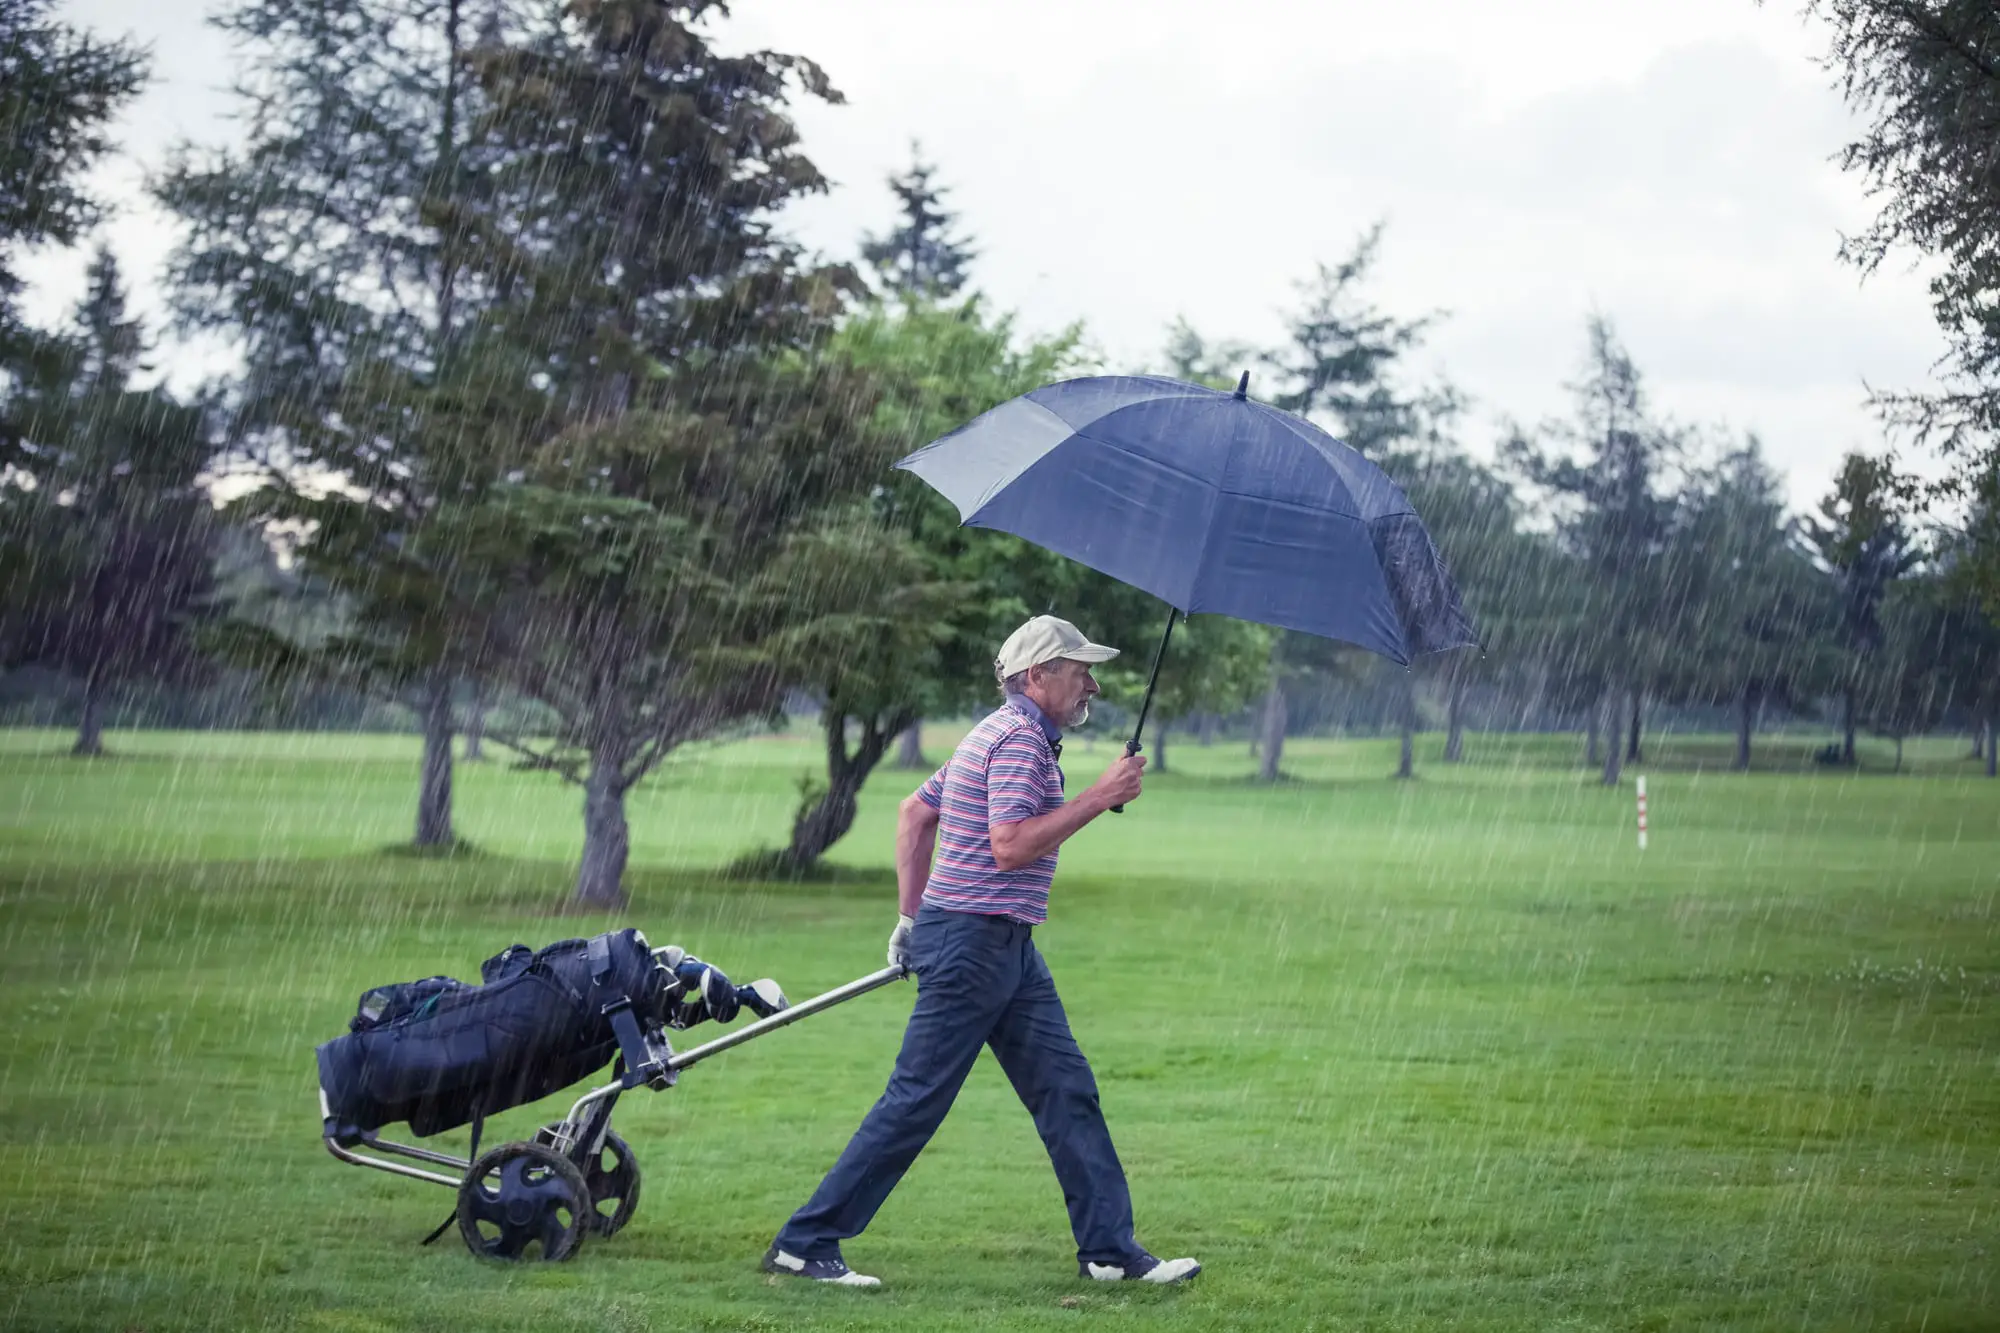 What Size Golf Umbrella Do I Need? Here's A Quick Guide! - Champ Golf